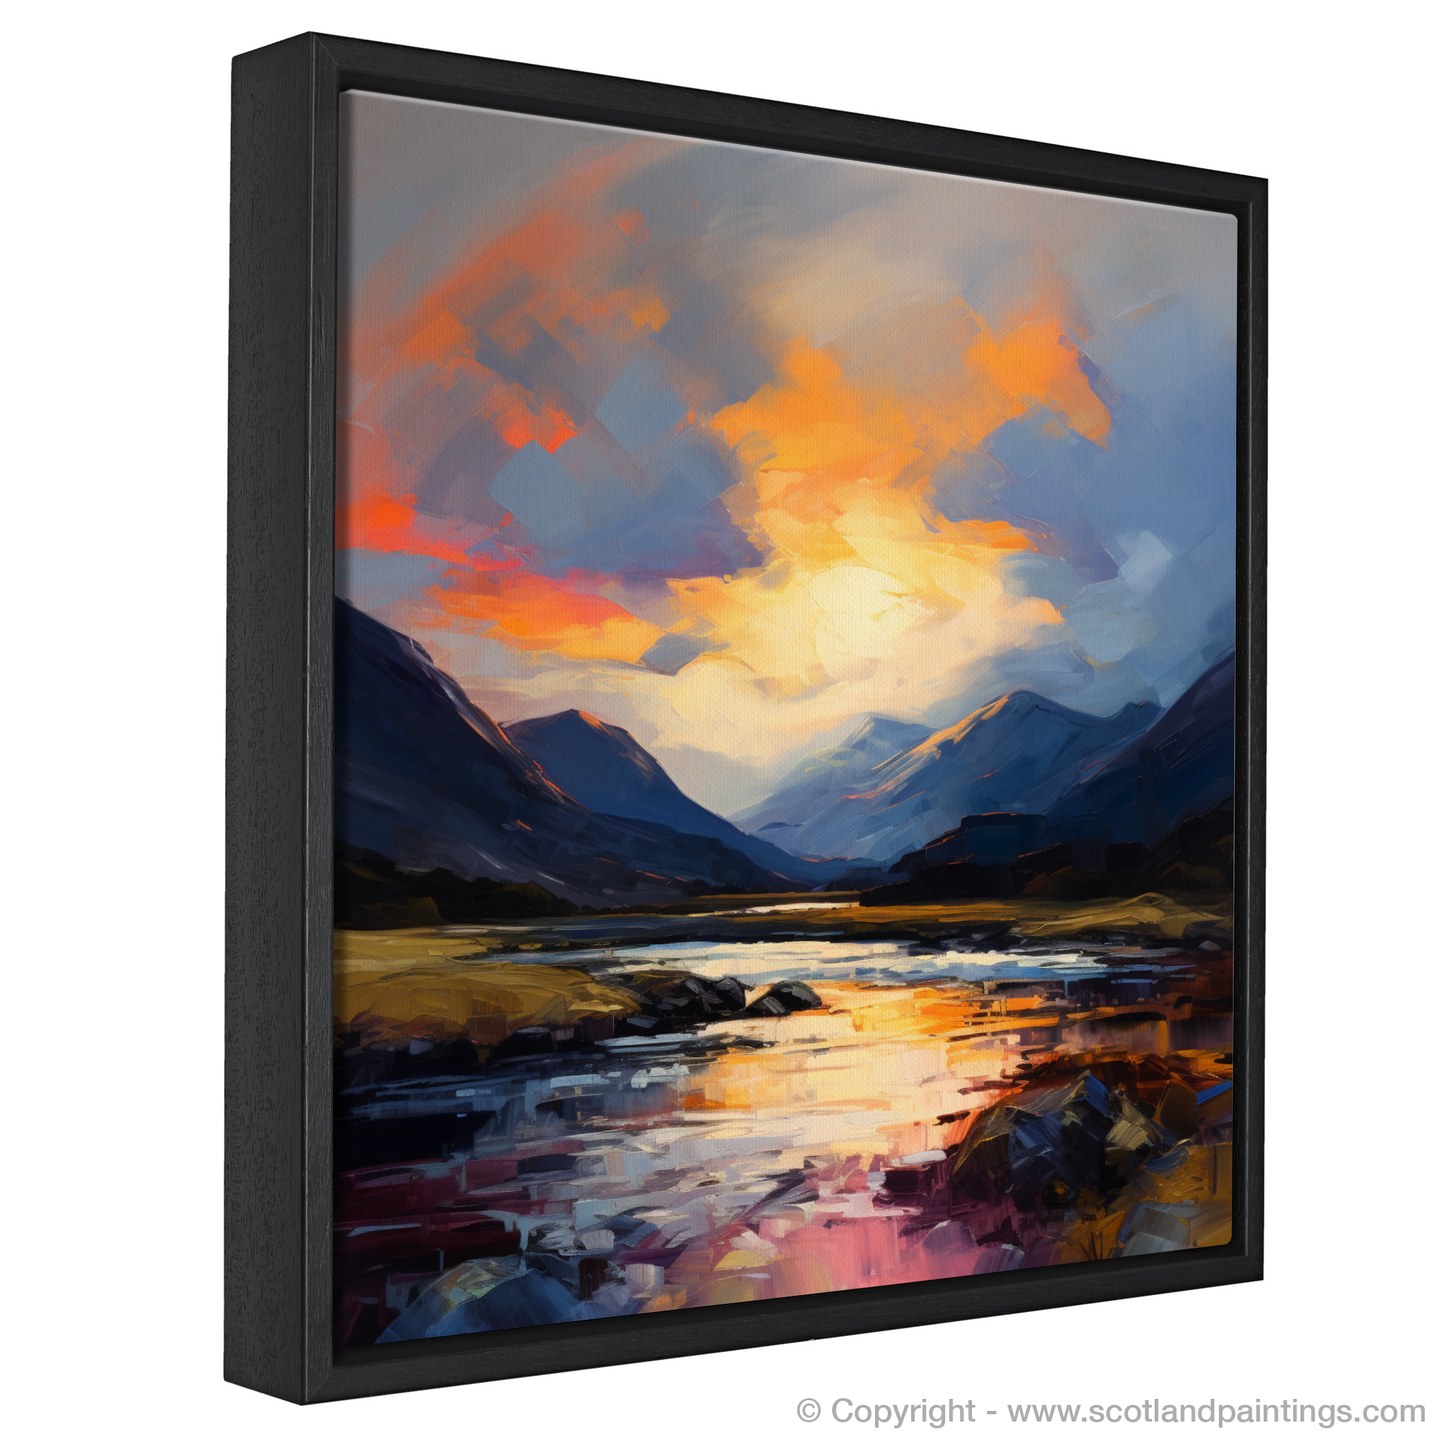 Painting and Art Print of Moody clouds at sunset in Glencoe entitled "Sunset Fury Over Glencoe".